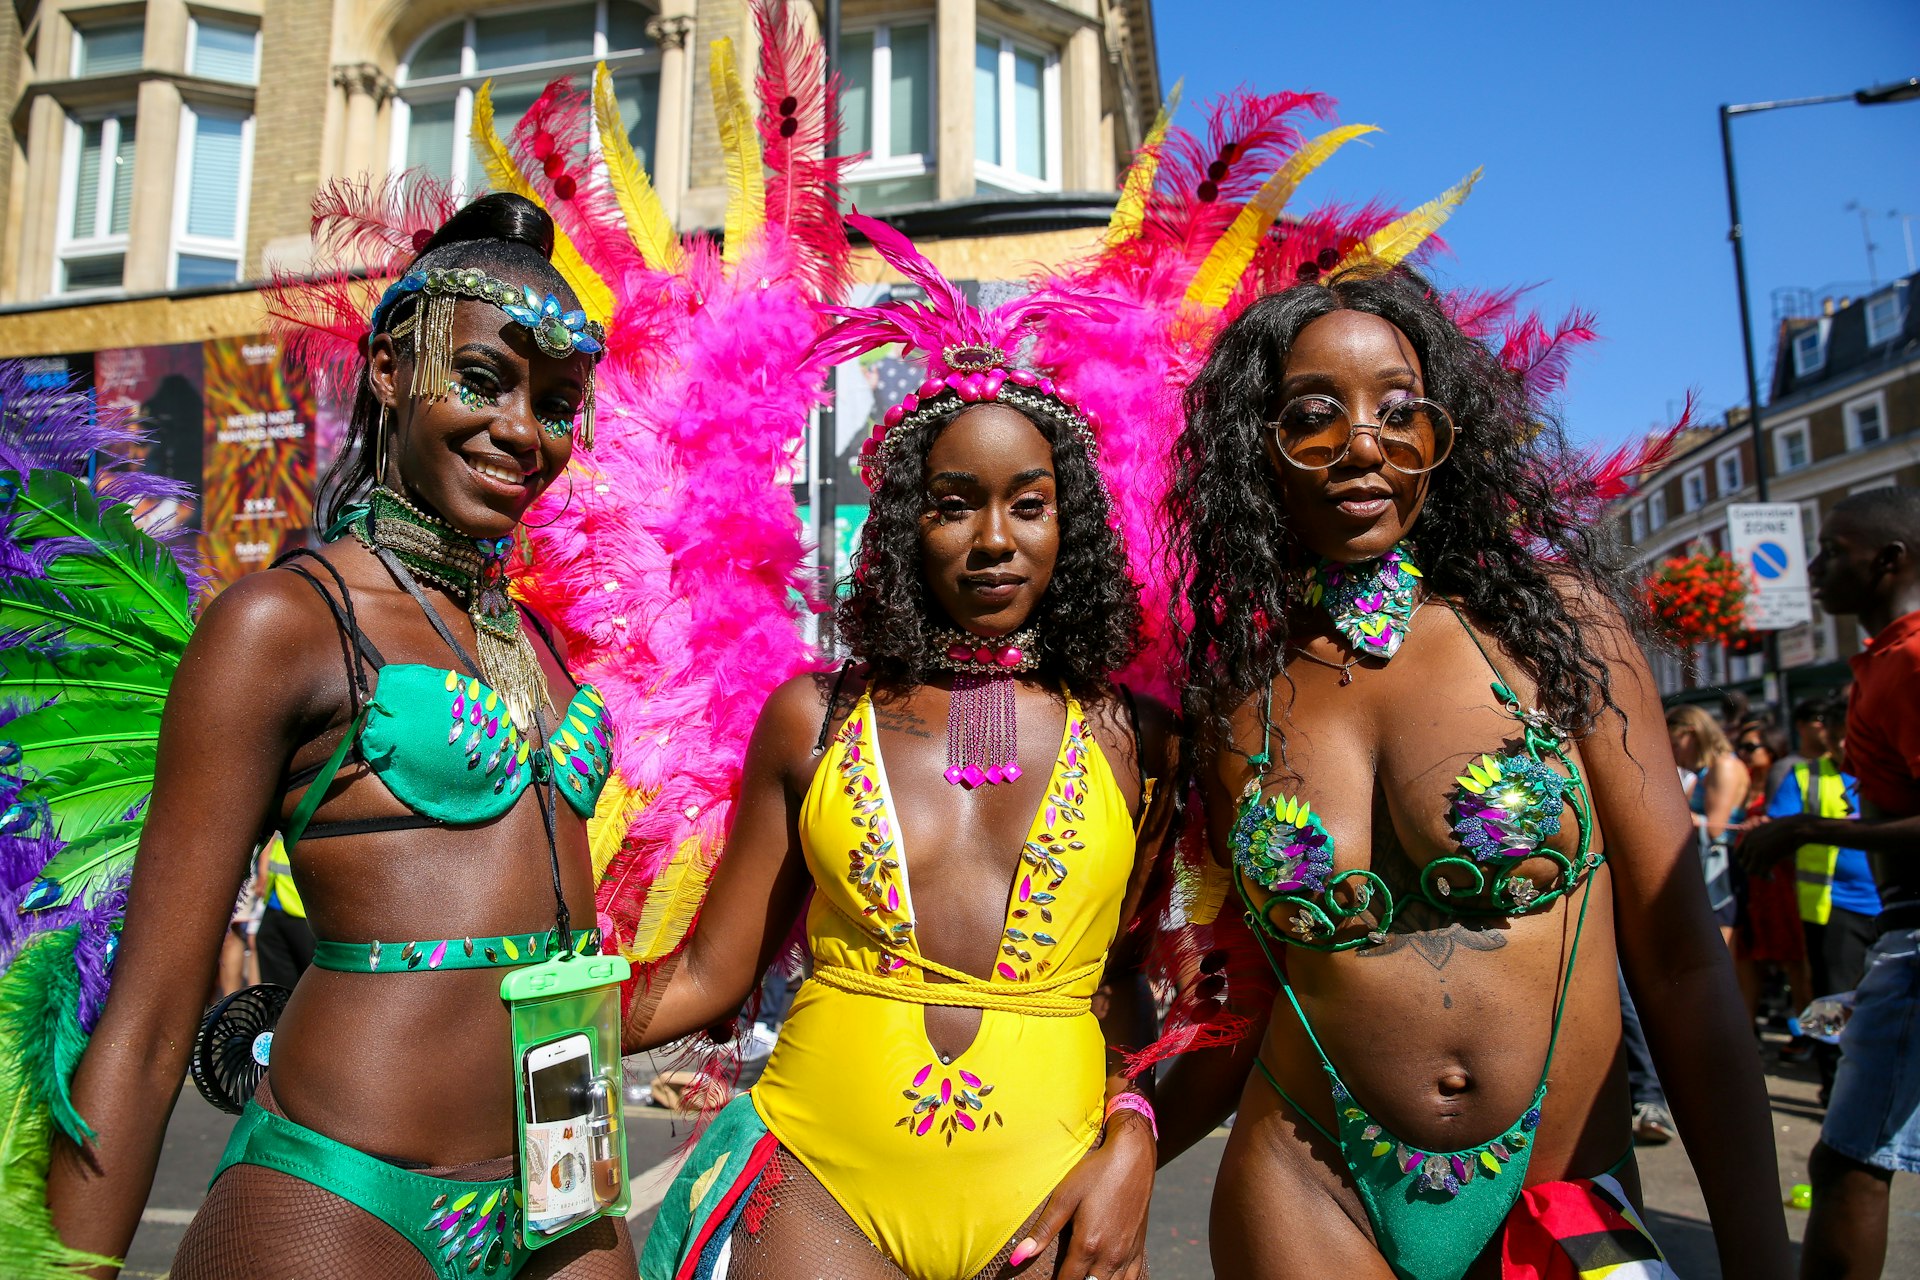 Dancers in colourful costumes during the 2019 Notting Hill